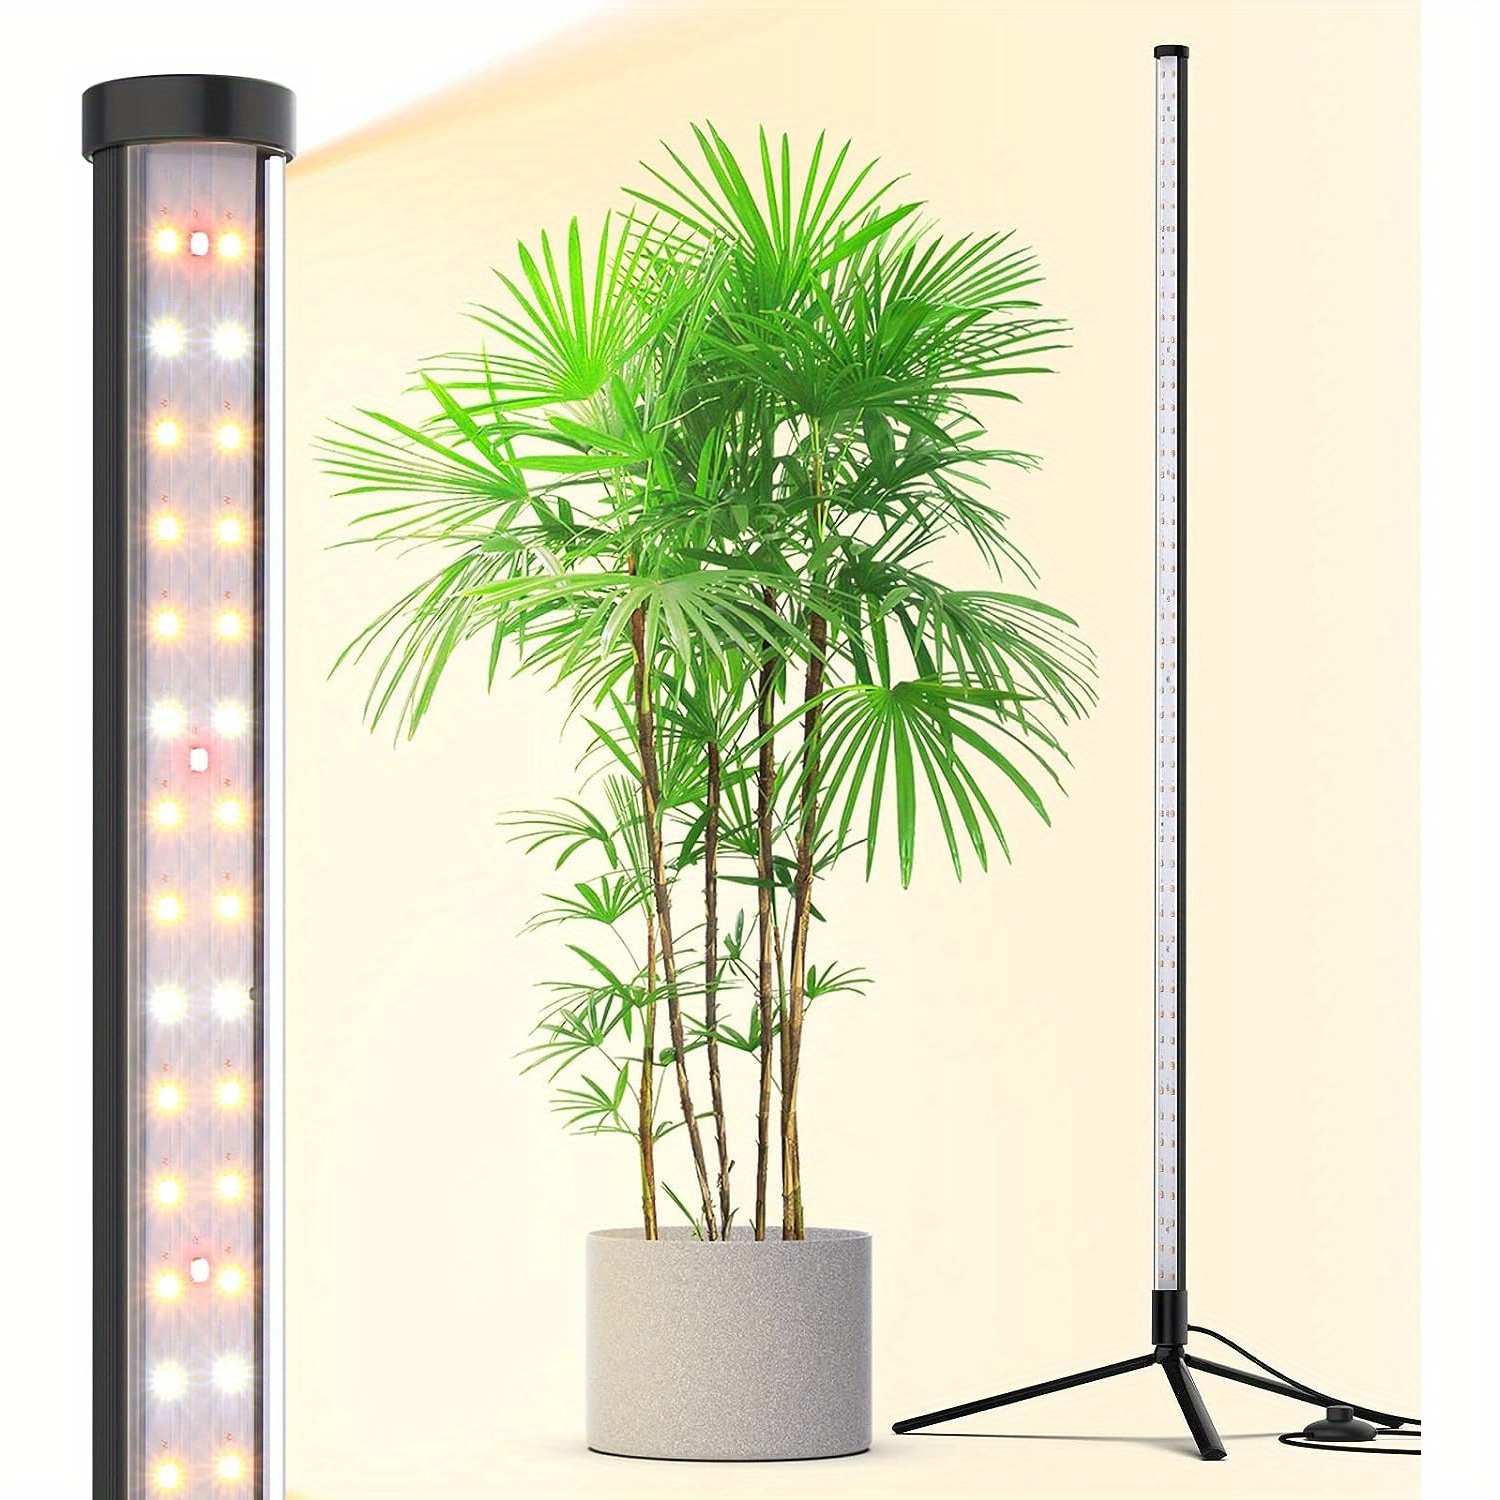 

Grow Lights For Indoor Plants With Stand, 42w 169 Leds Full Spectrum Wide Illumination Area, T10 Vertical Standing Plant Grow Light, 4ft Height With On/off Switch And Tripod Floor Stand